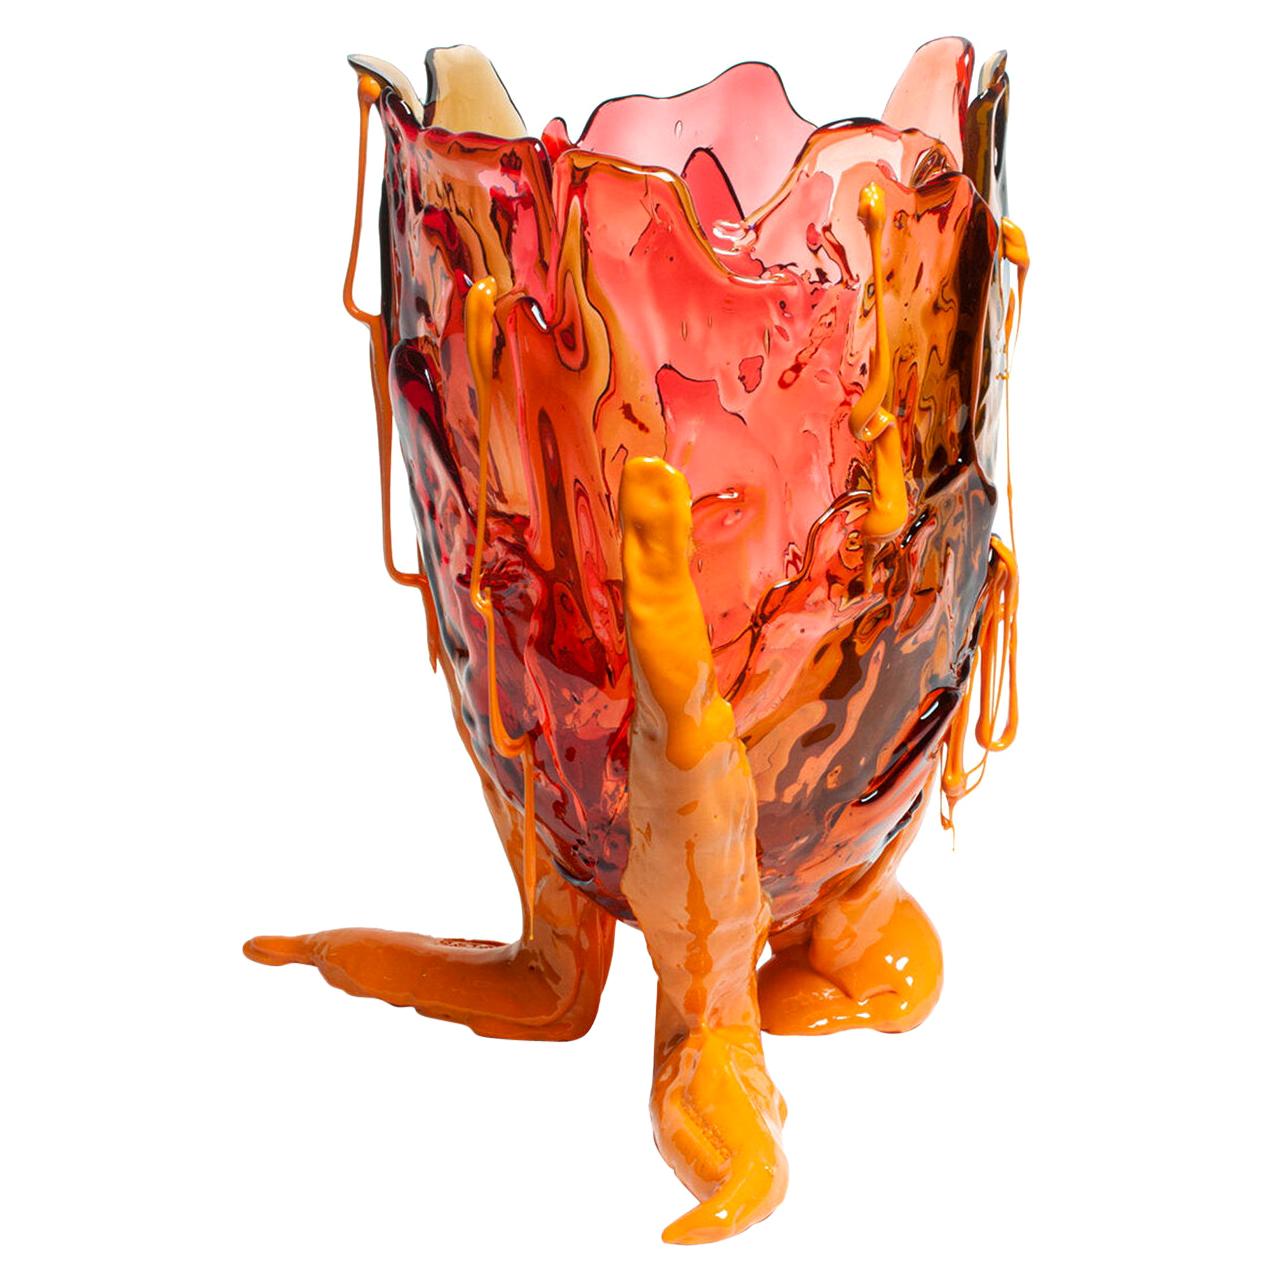 Clear Special Extracolor Large Red Vase by Gaetano Pesce